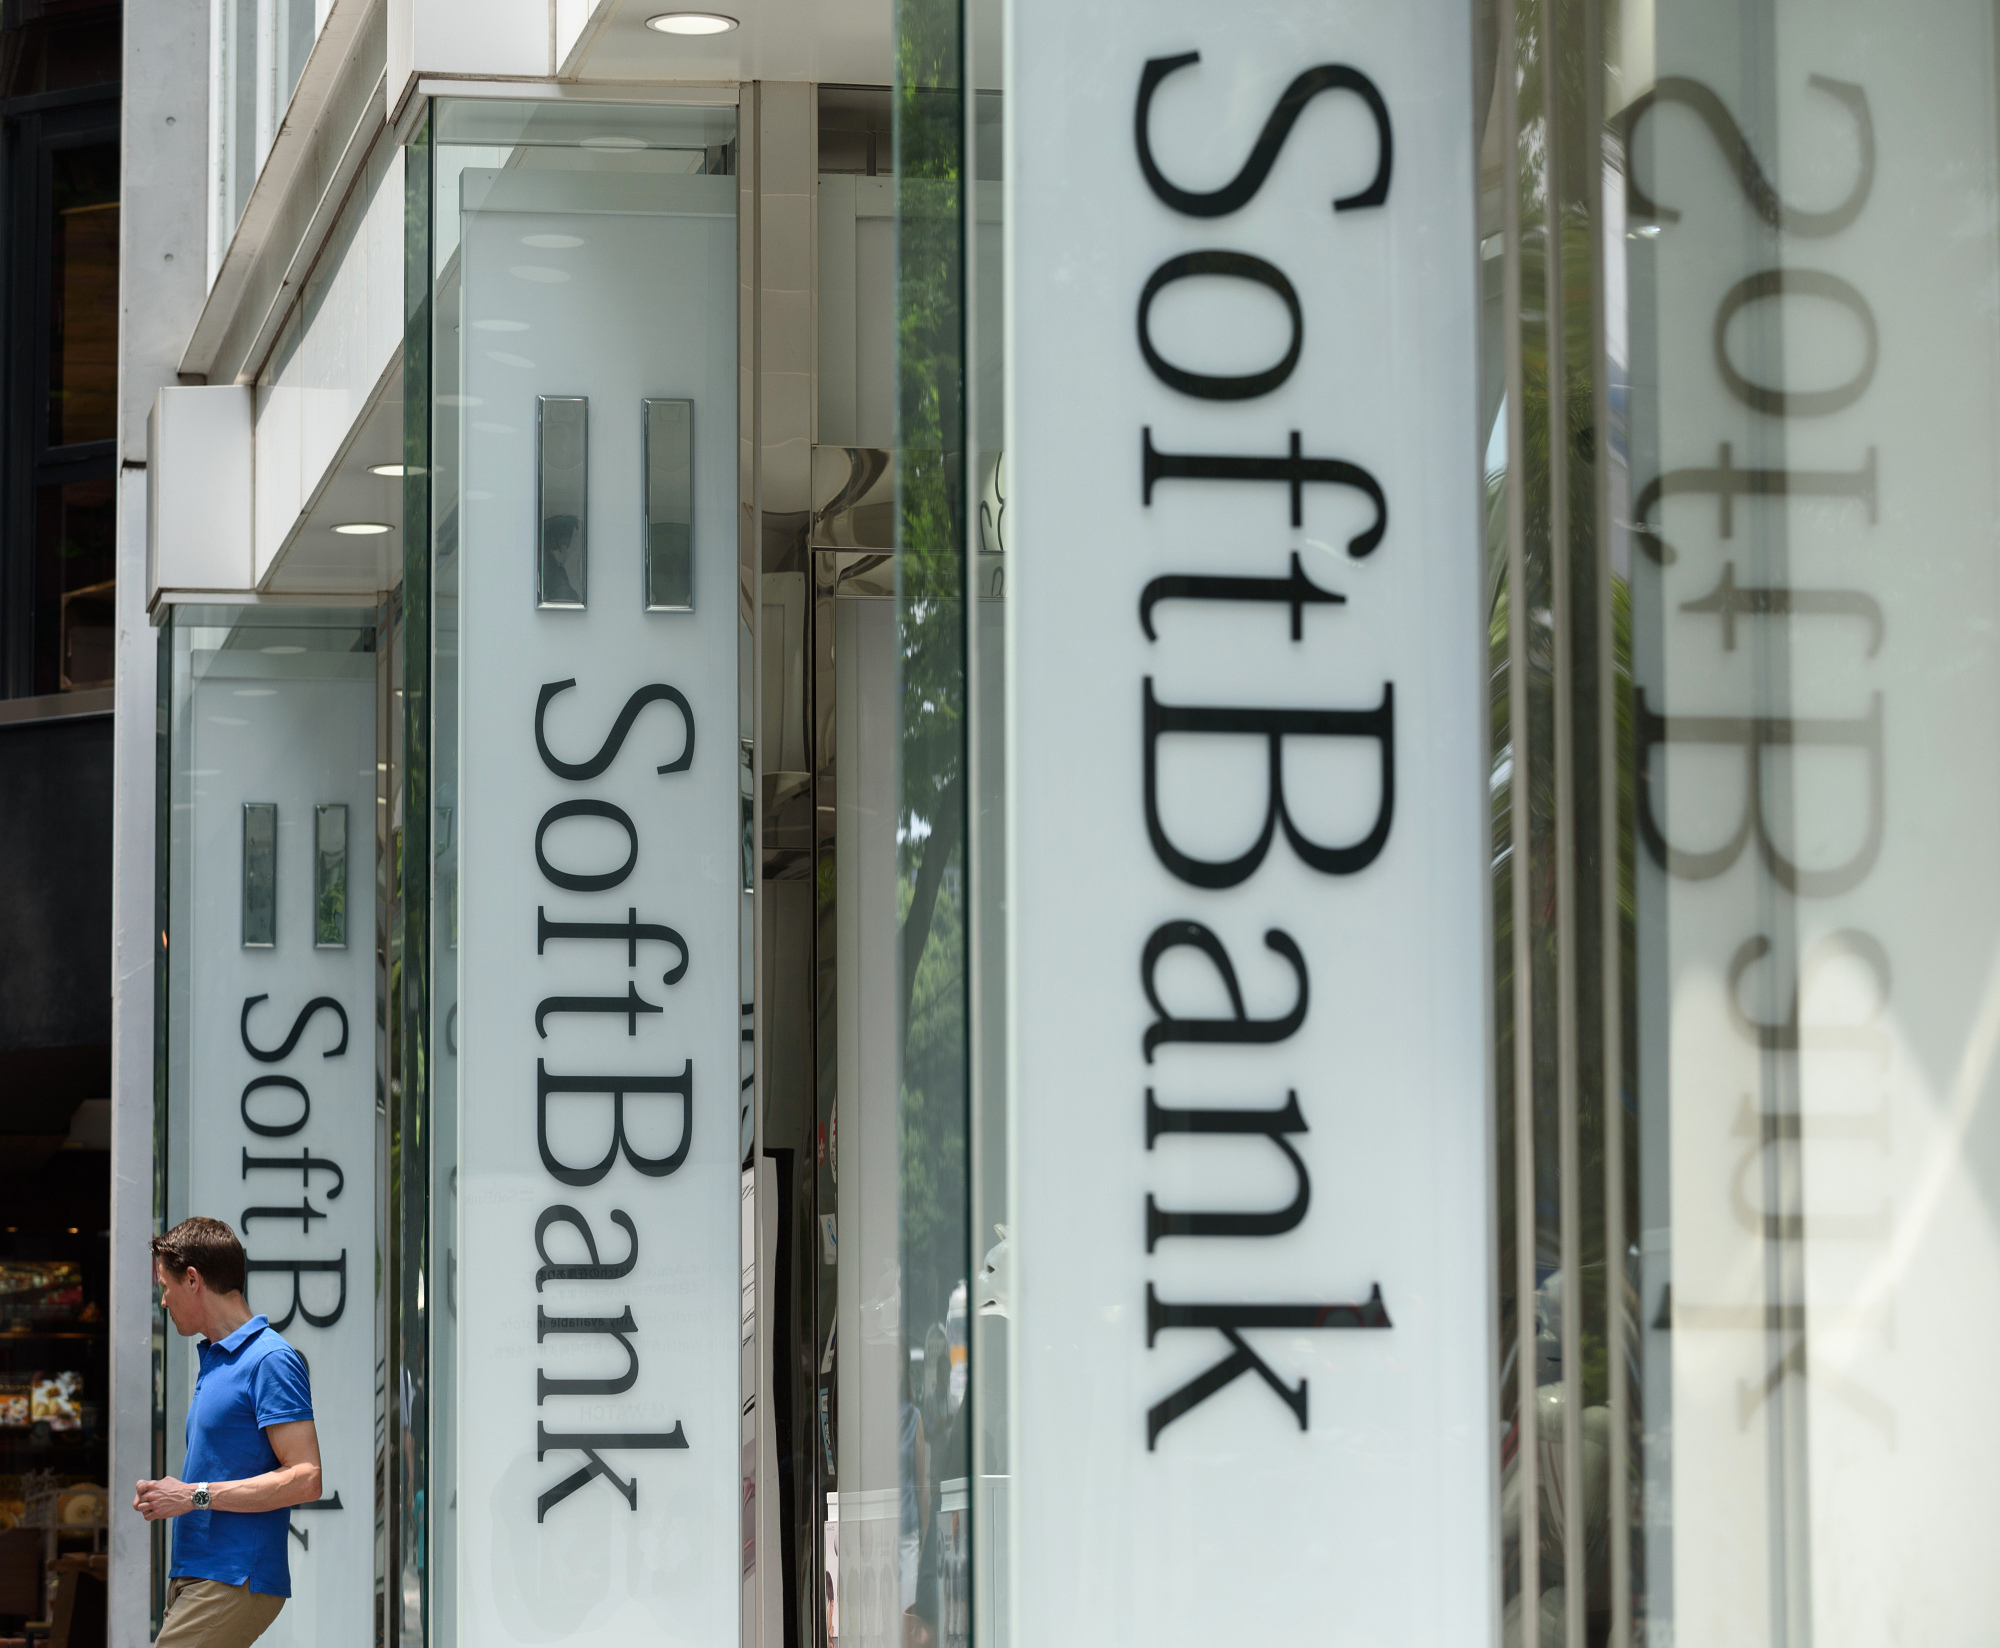 SoftBank Stores as Shares Dive After Masayoshi Son's $32 Billion Takeover of ARM